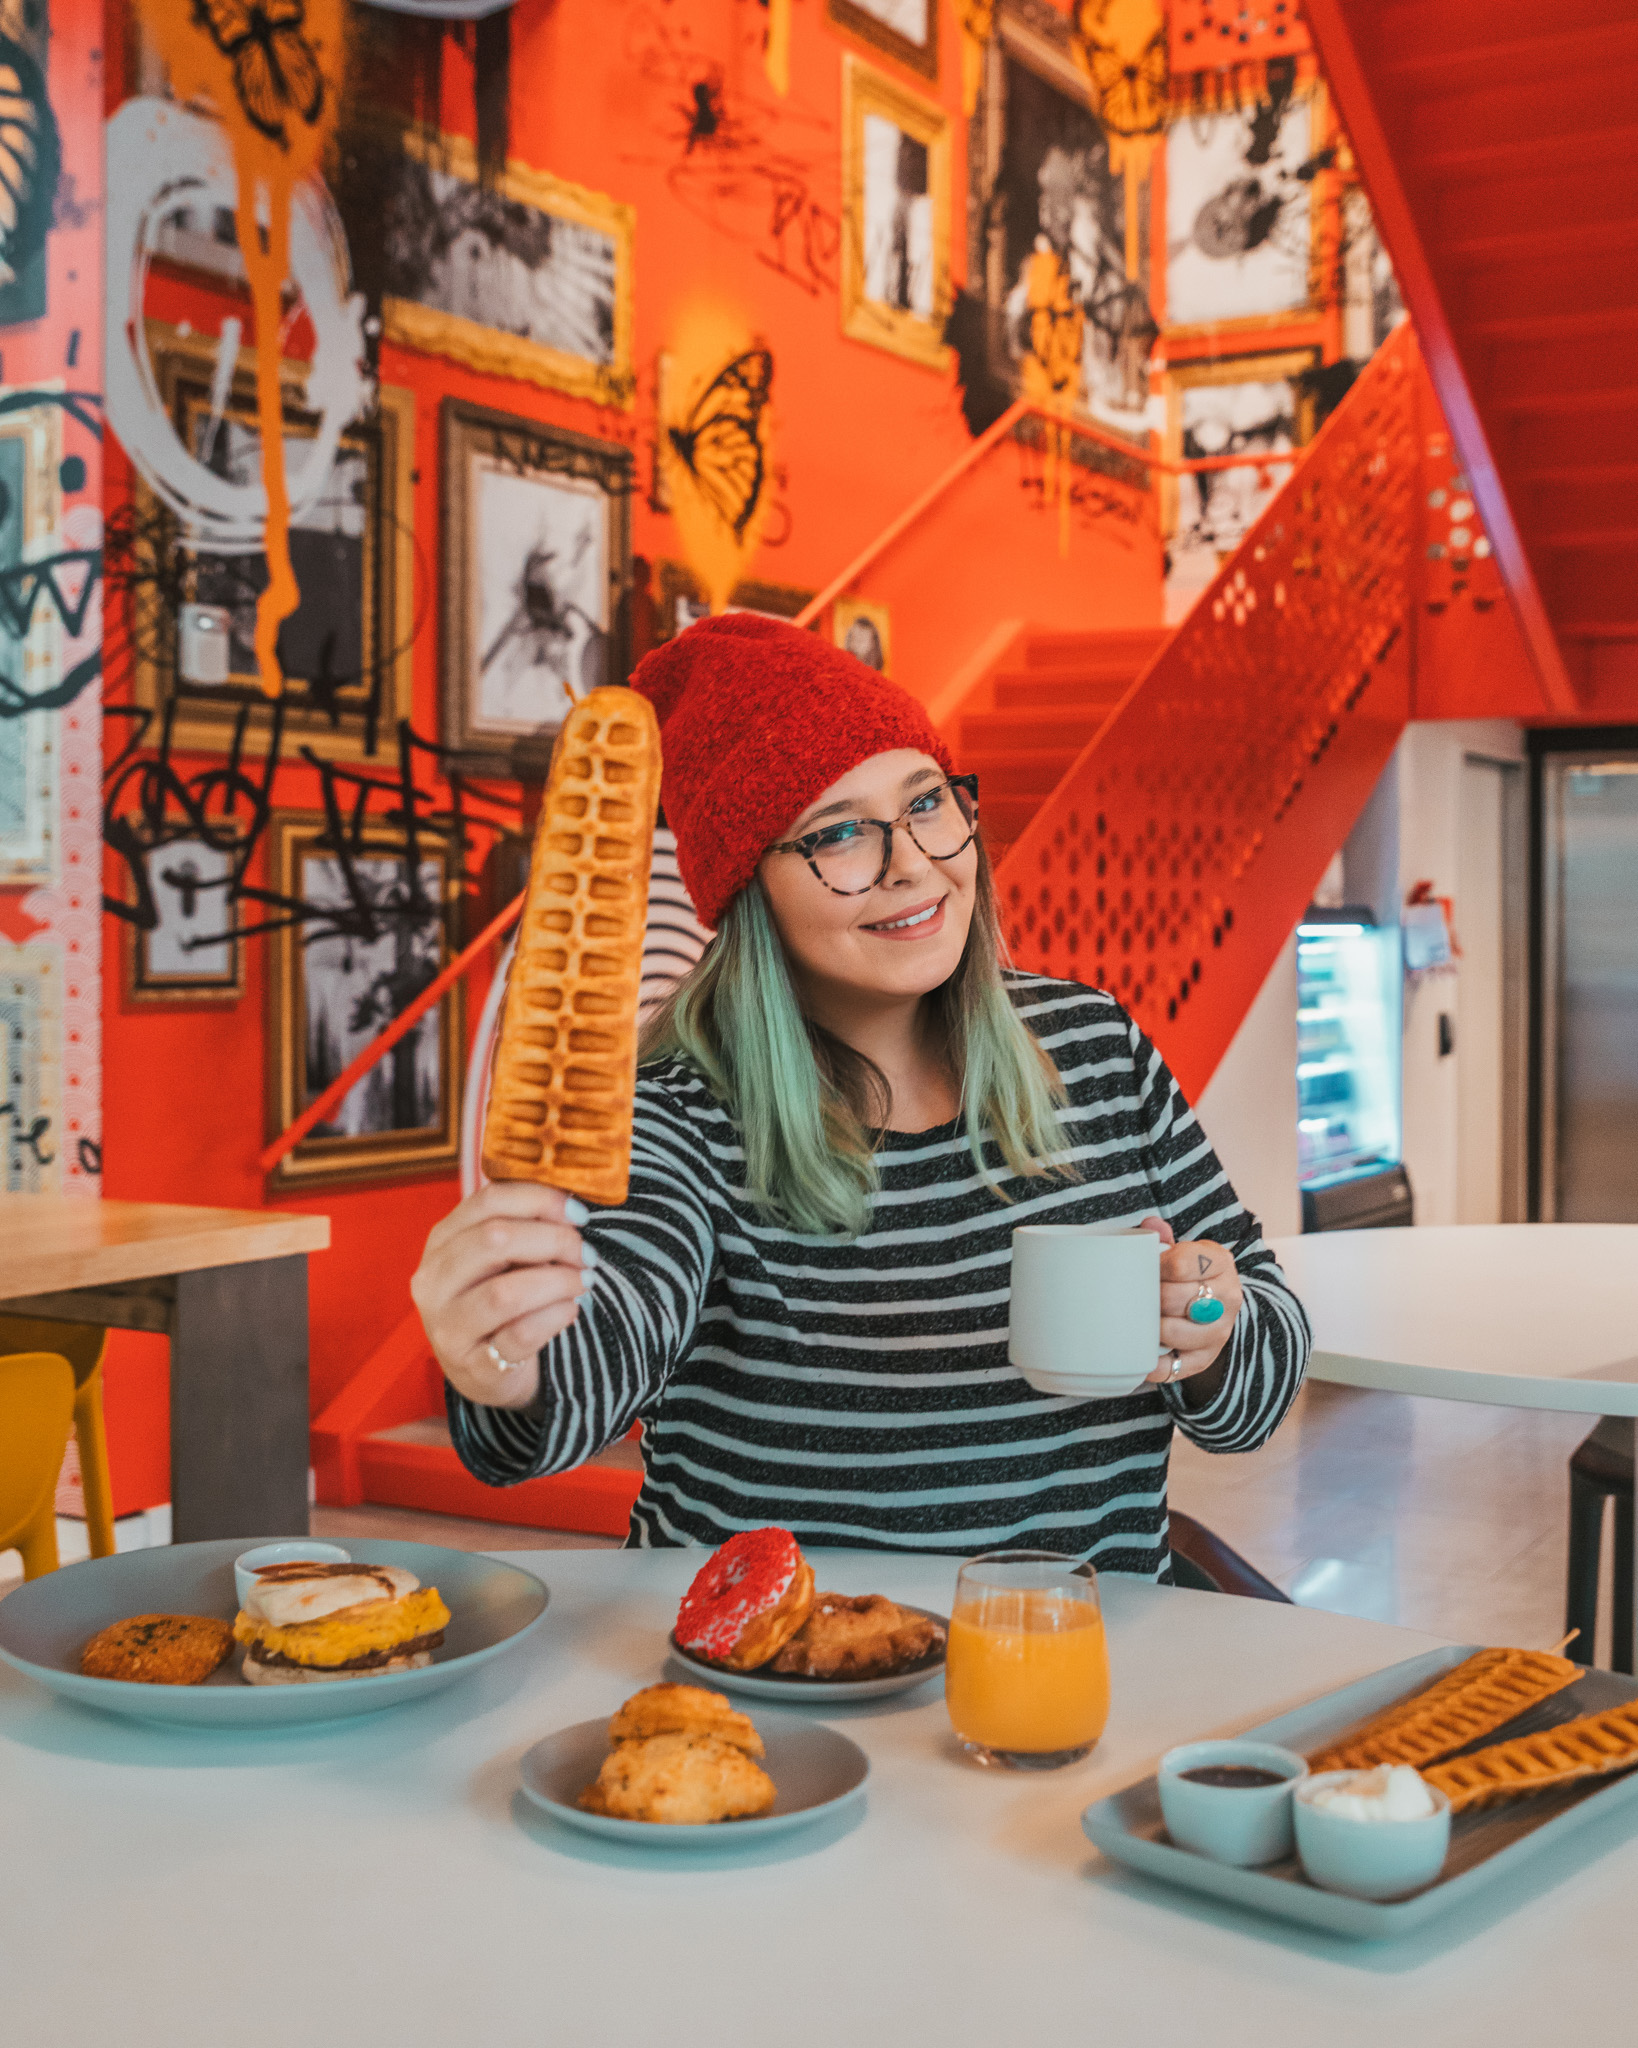 Radisson RED Restaurant with waffles on a stick // The Most Instagrammable Spots in Portland, Oregon // #readysetjetset #portland #oregon #pdx #pnw #blogpost #photoguide